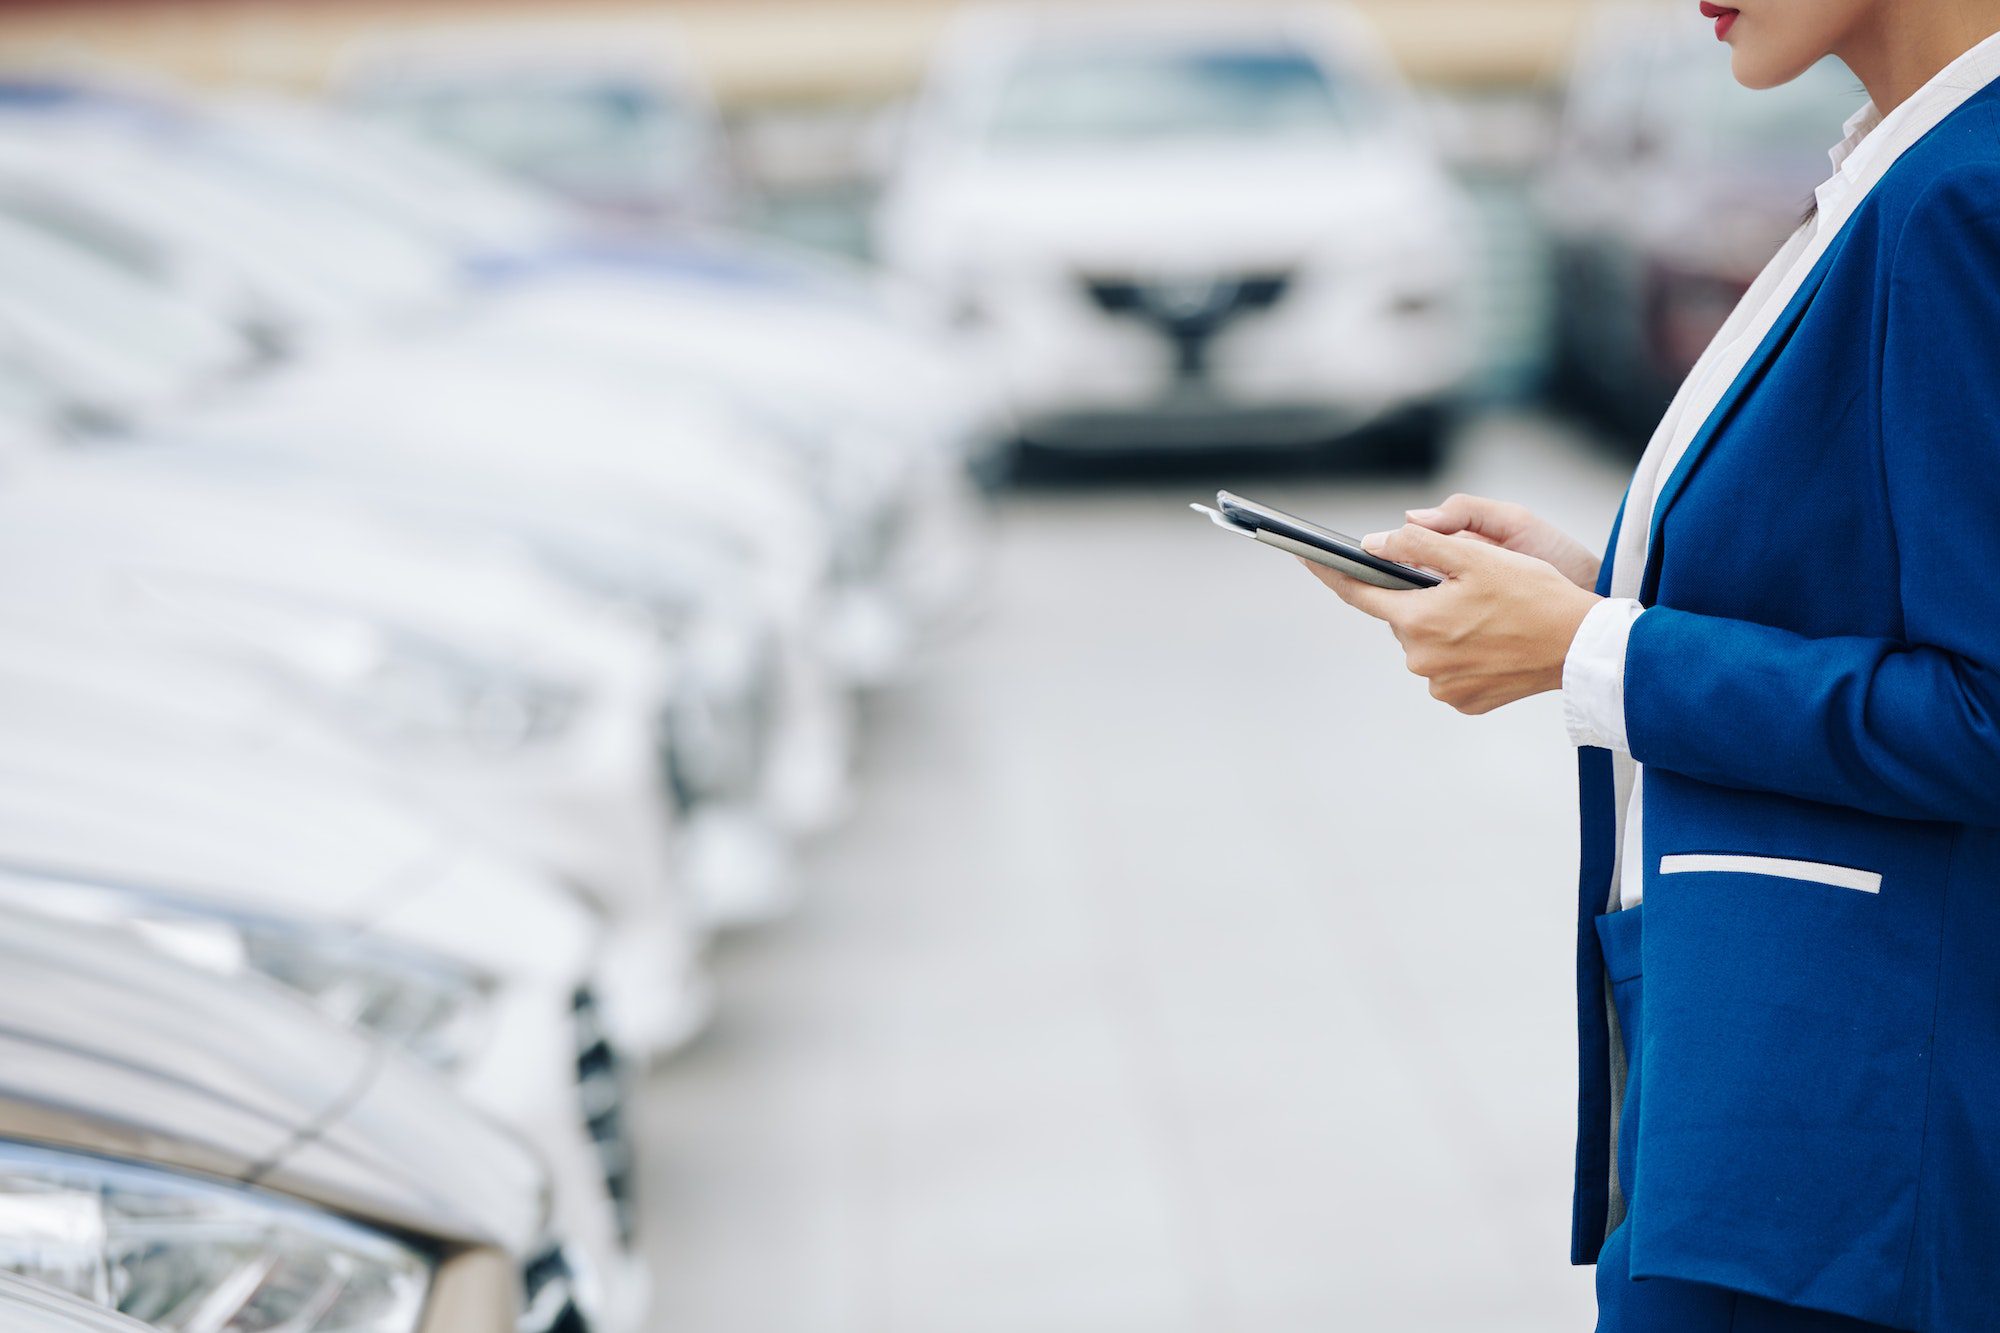 Accelerate Your Dealership's Online Presence with These Digital Marketing Ideas